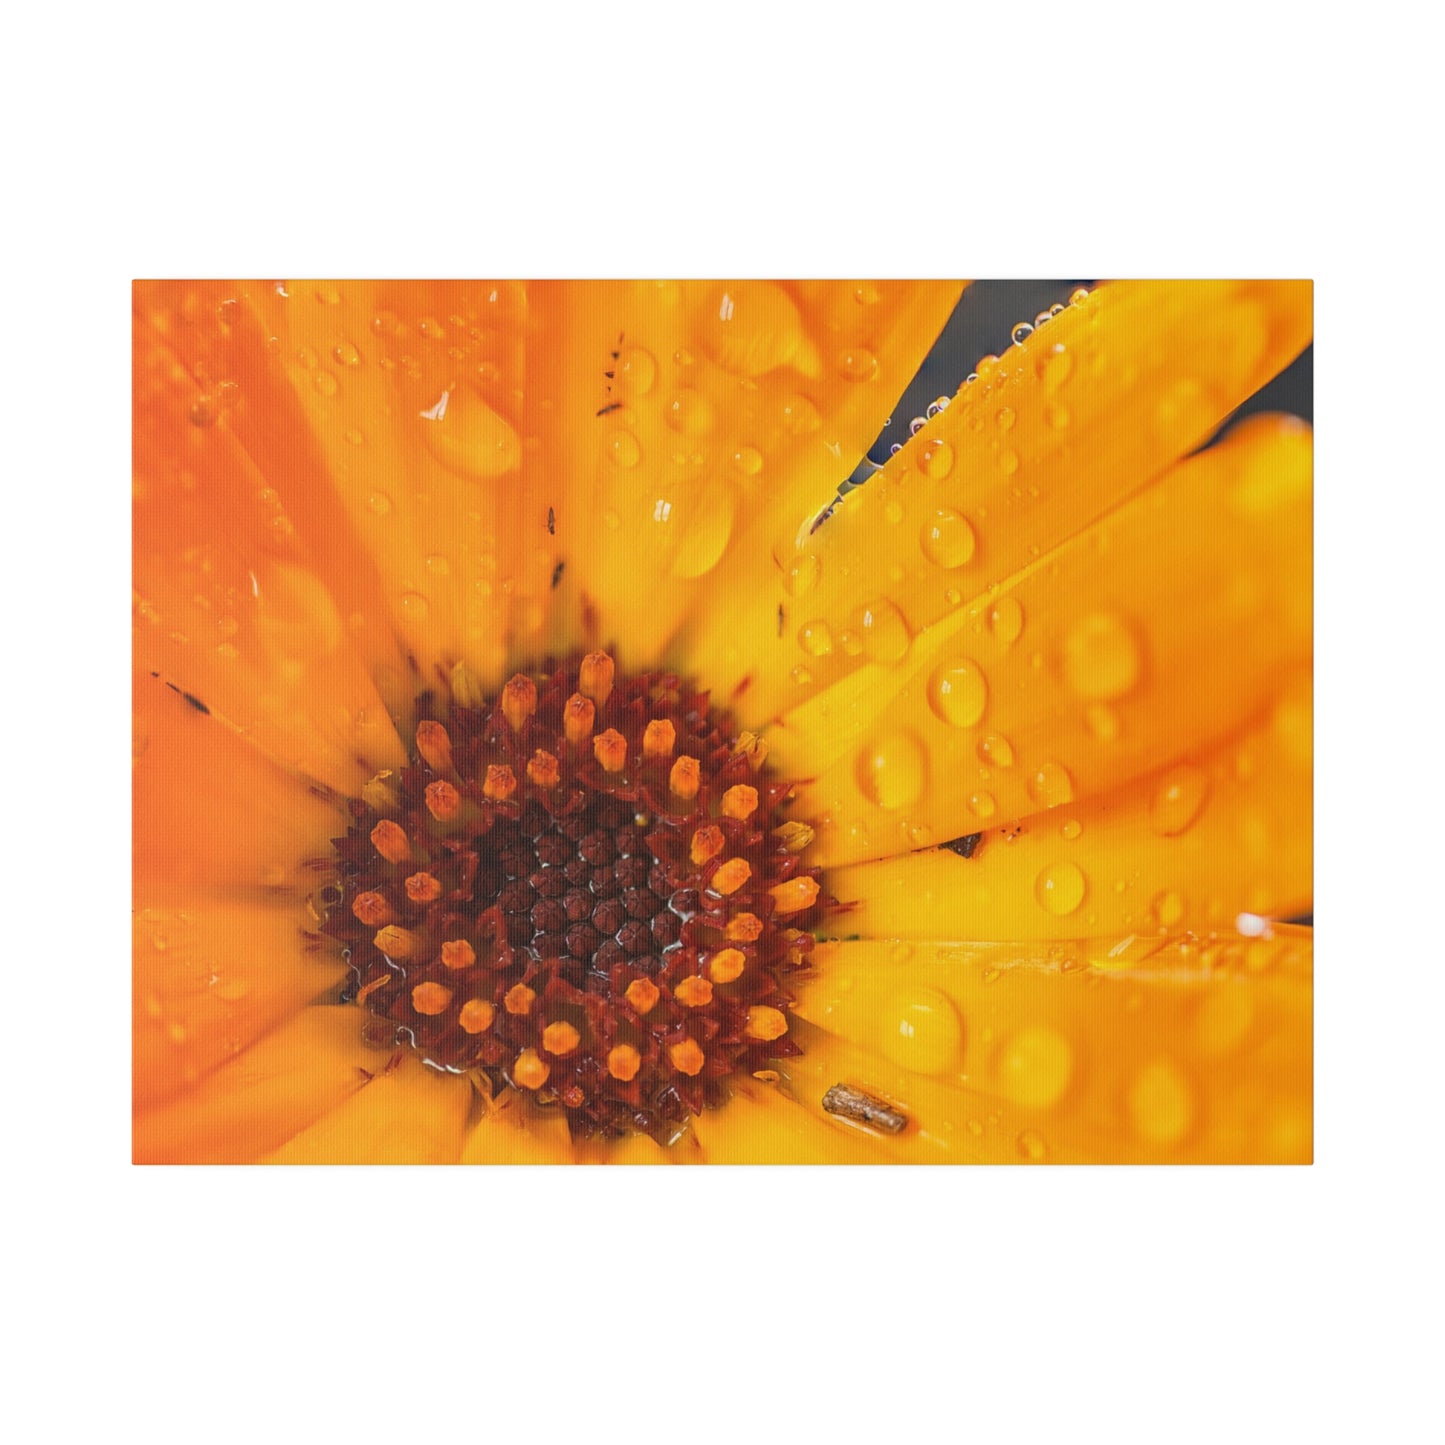 Orange flower petals drenched in dew printed on a stretched matte canvas